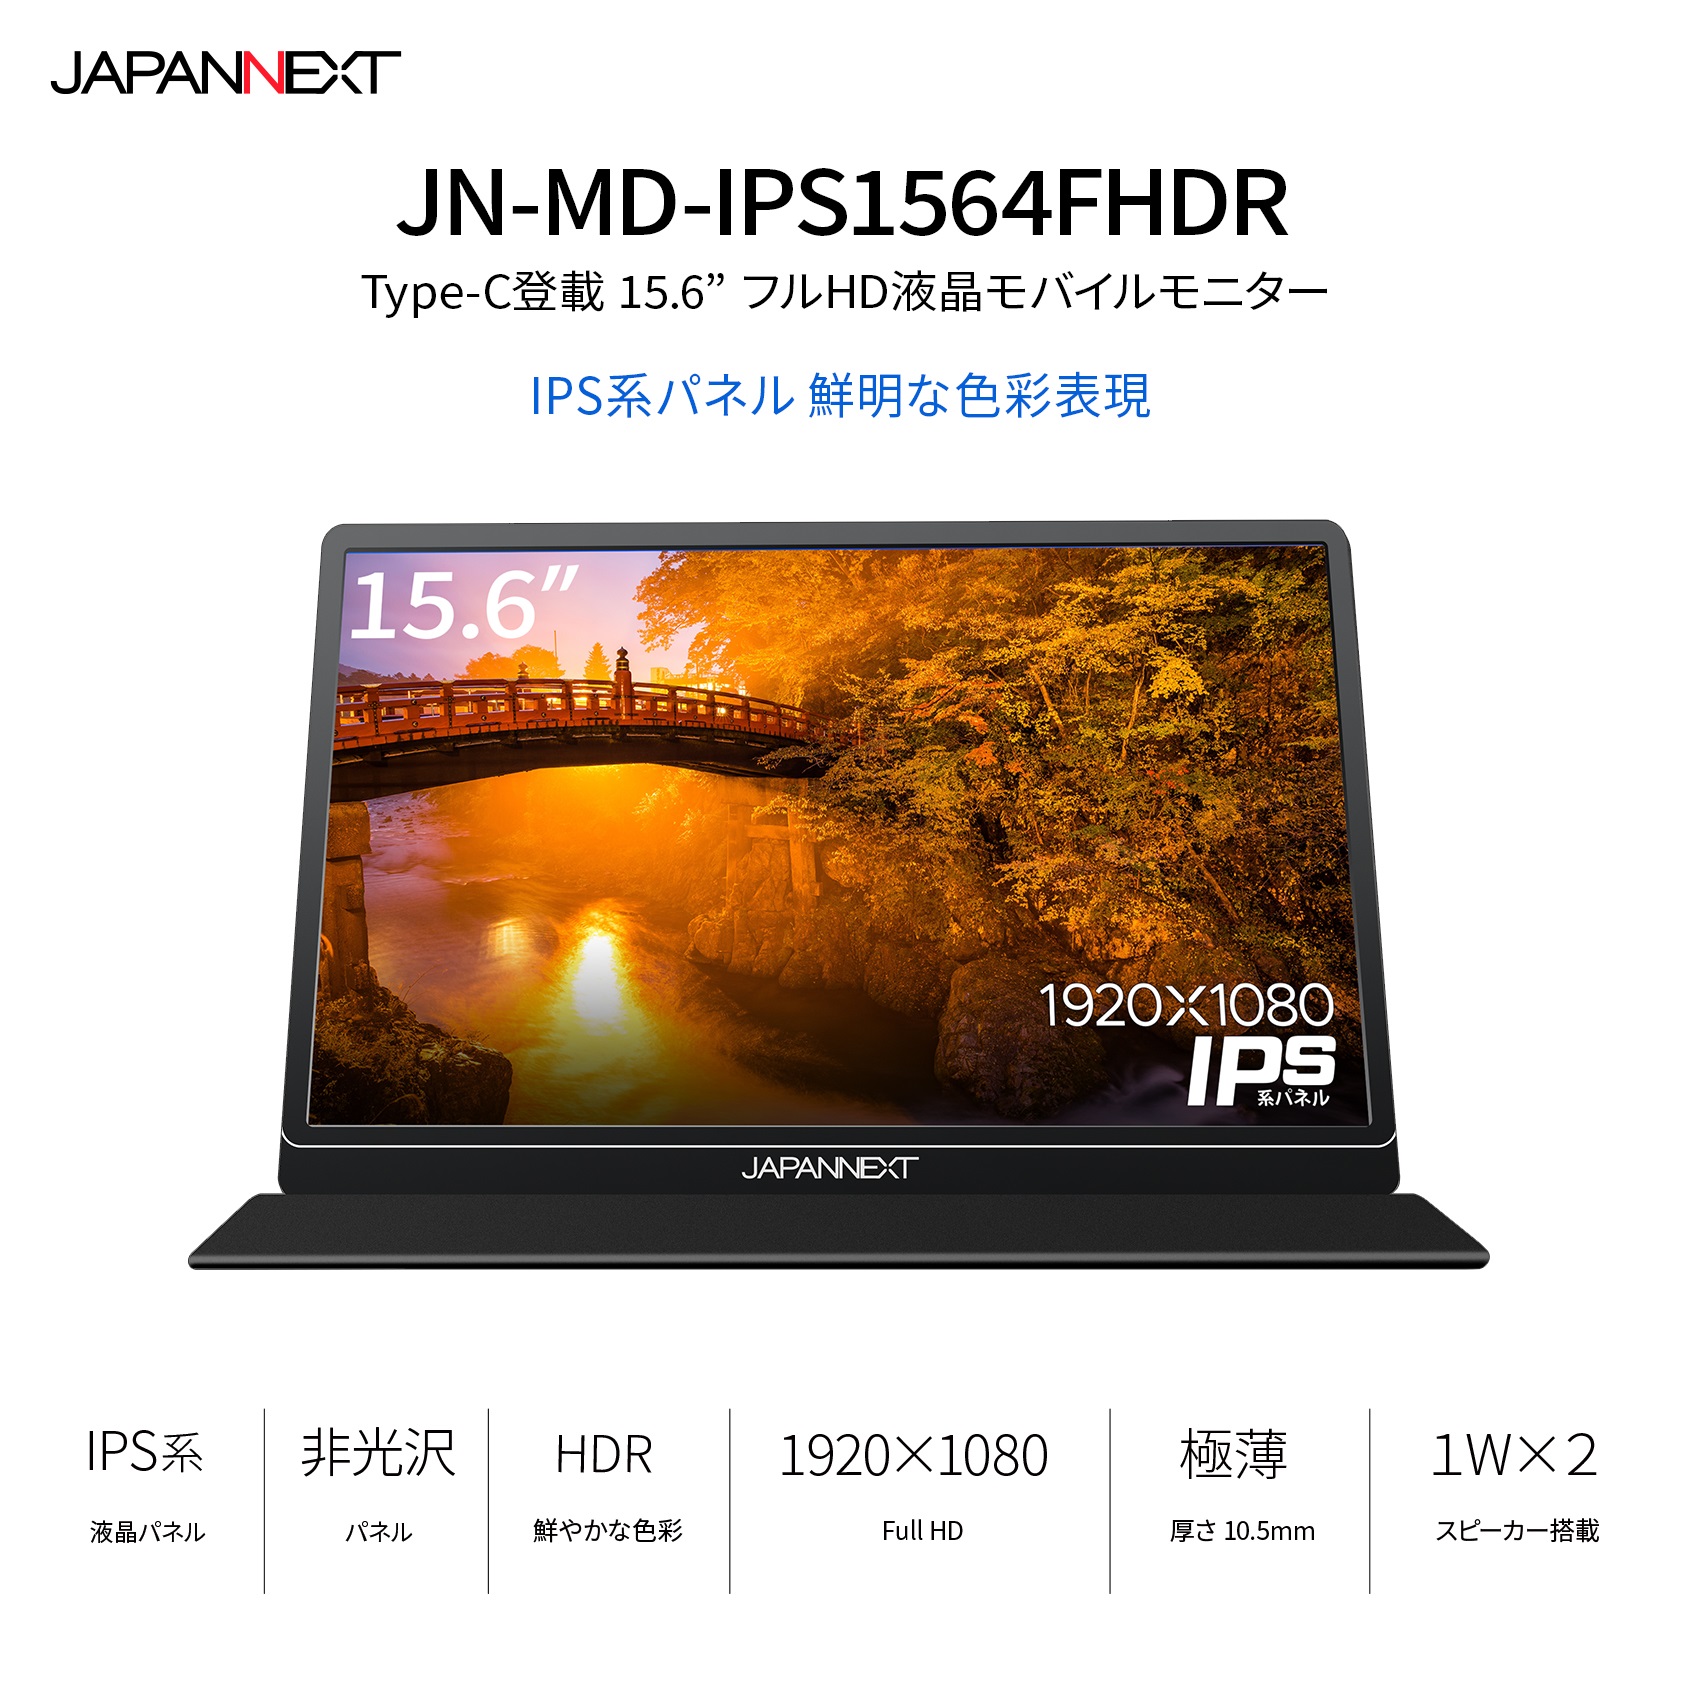 JAPANNEXT「JN-MD-IPS1564FHDR」<br>15.6型 フルHD(1920x1080